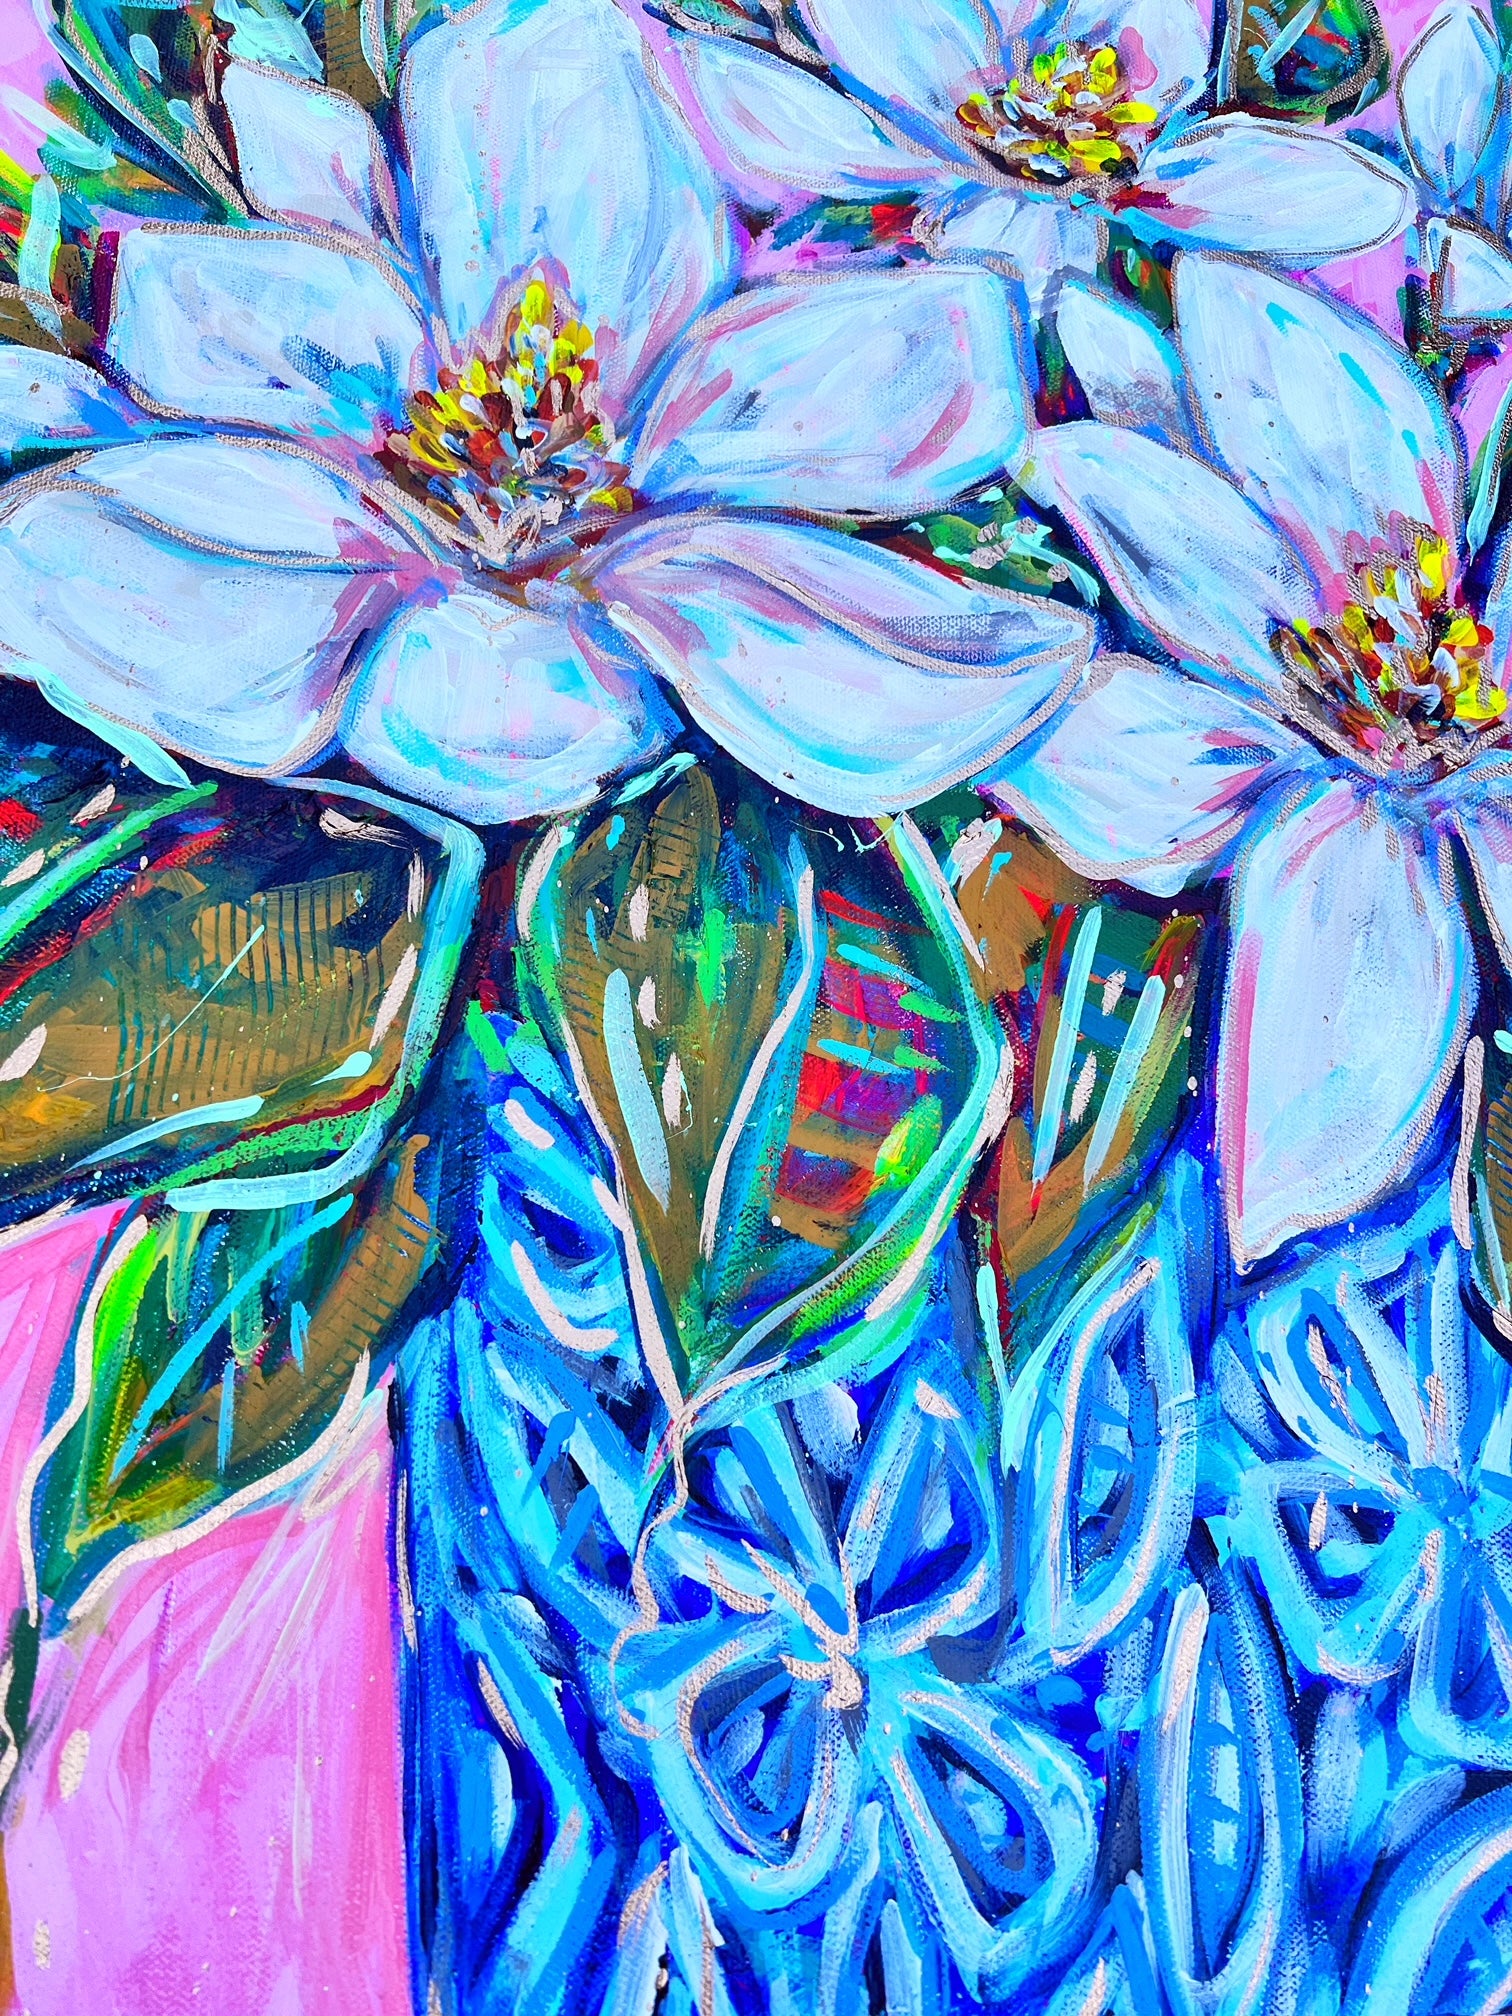 "Never Ending" 24"x24" Magnolias in Blue and White Vase Original on Canvas